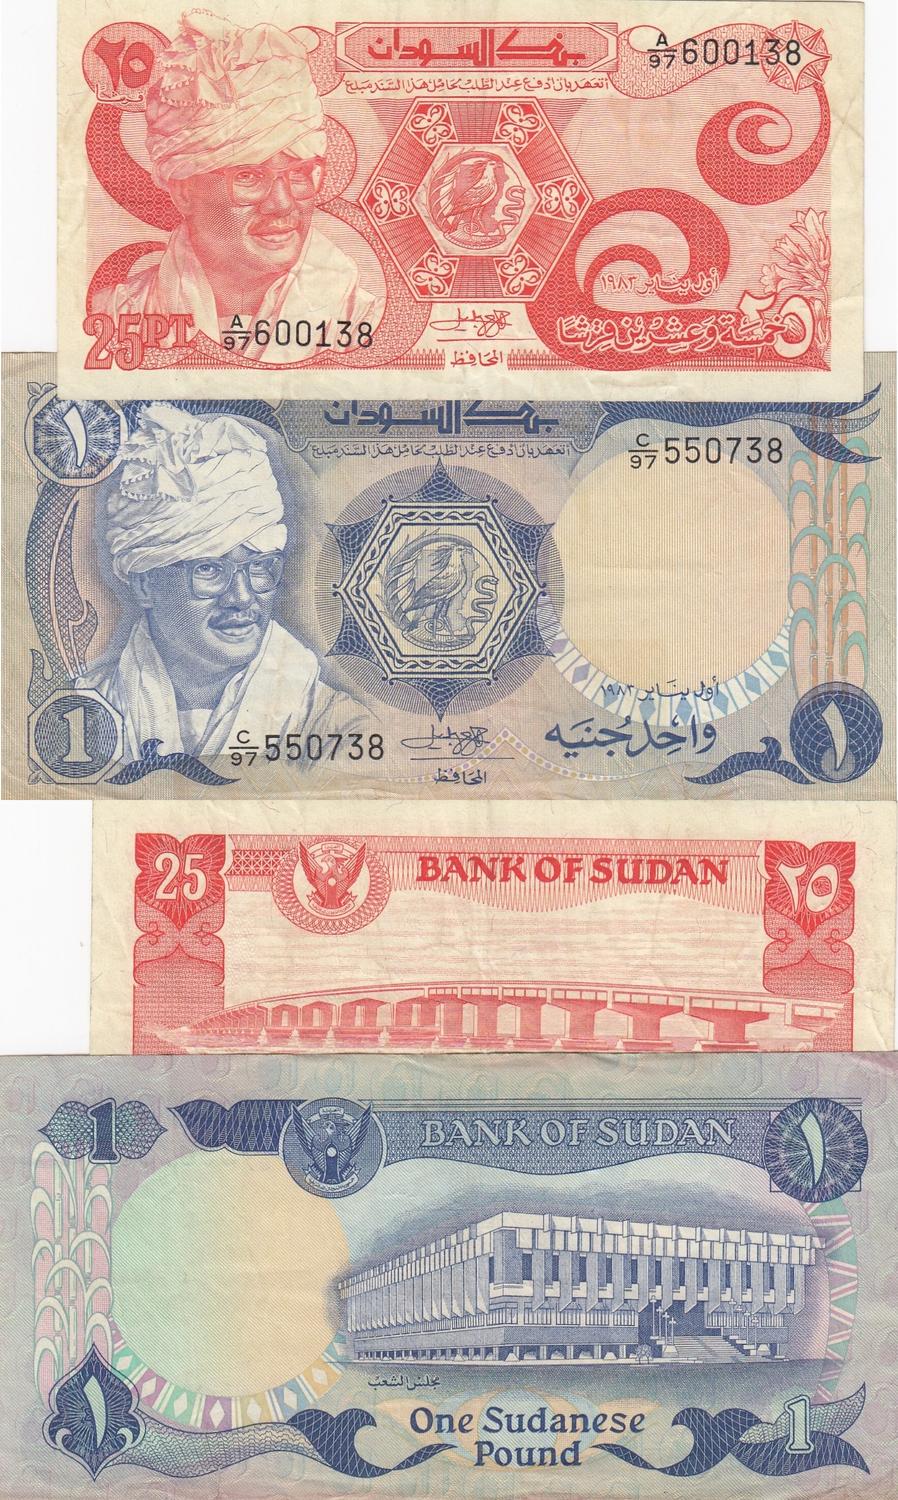 Sudan Circulating Coins and Currency Banknote Postcard 2013